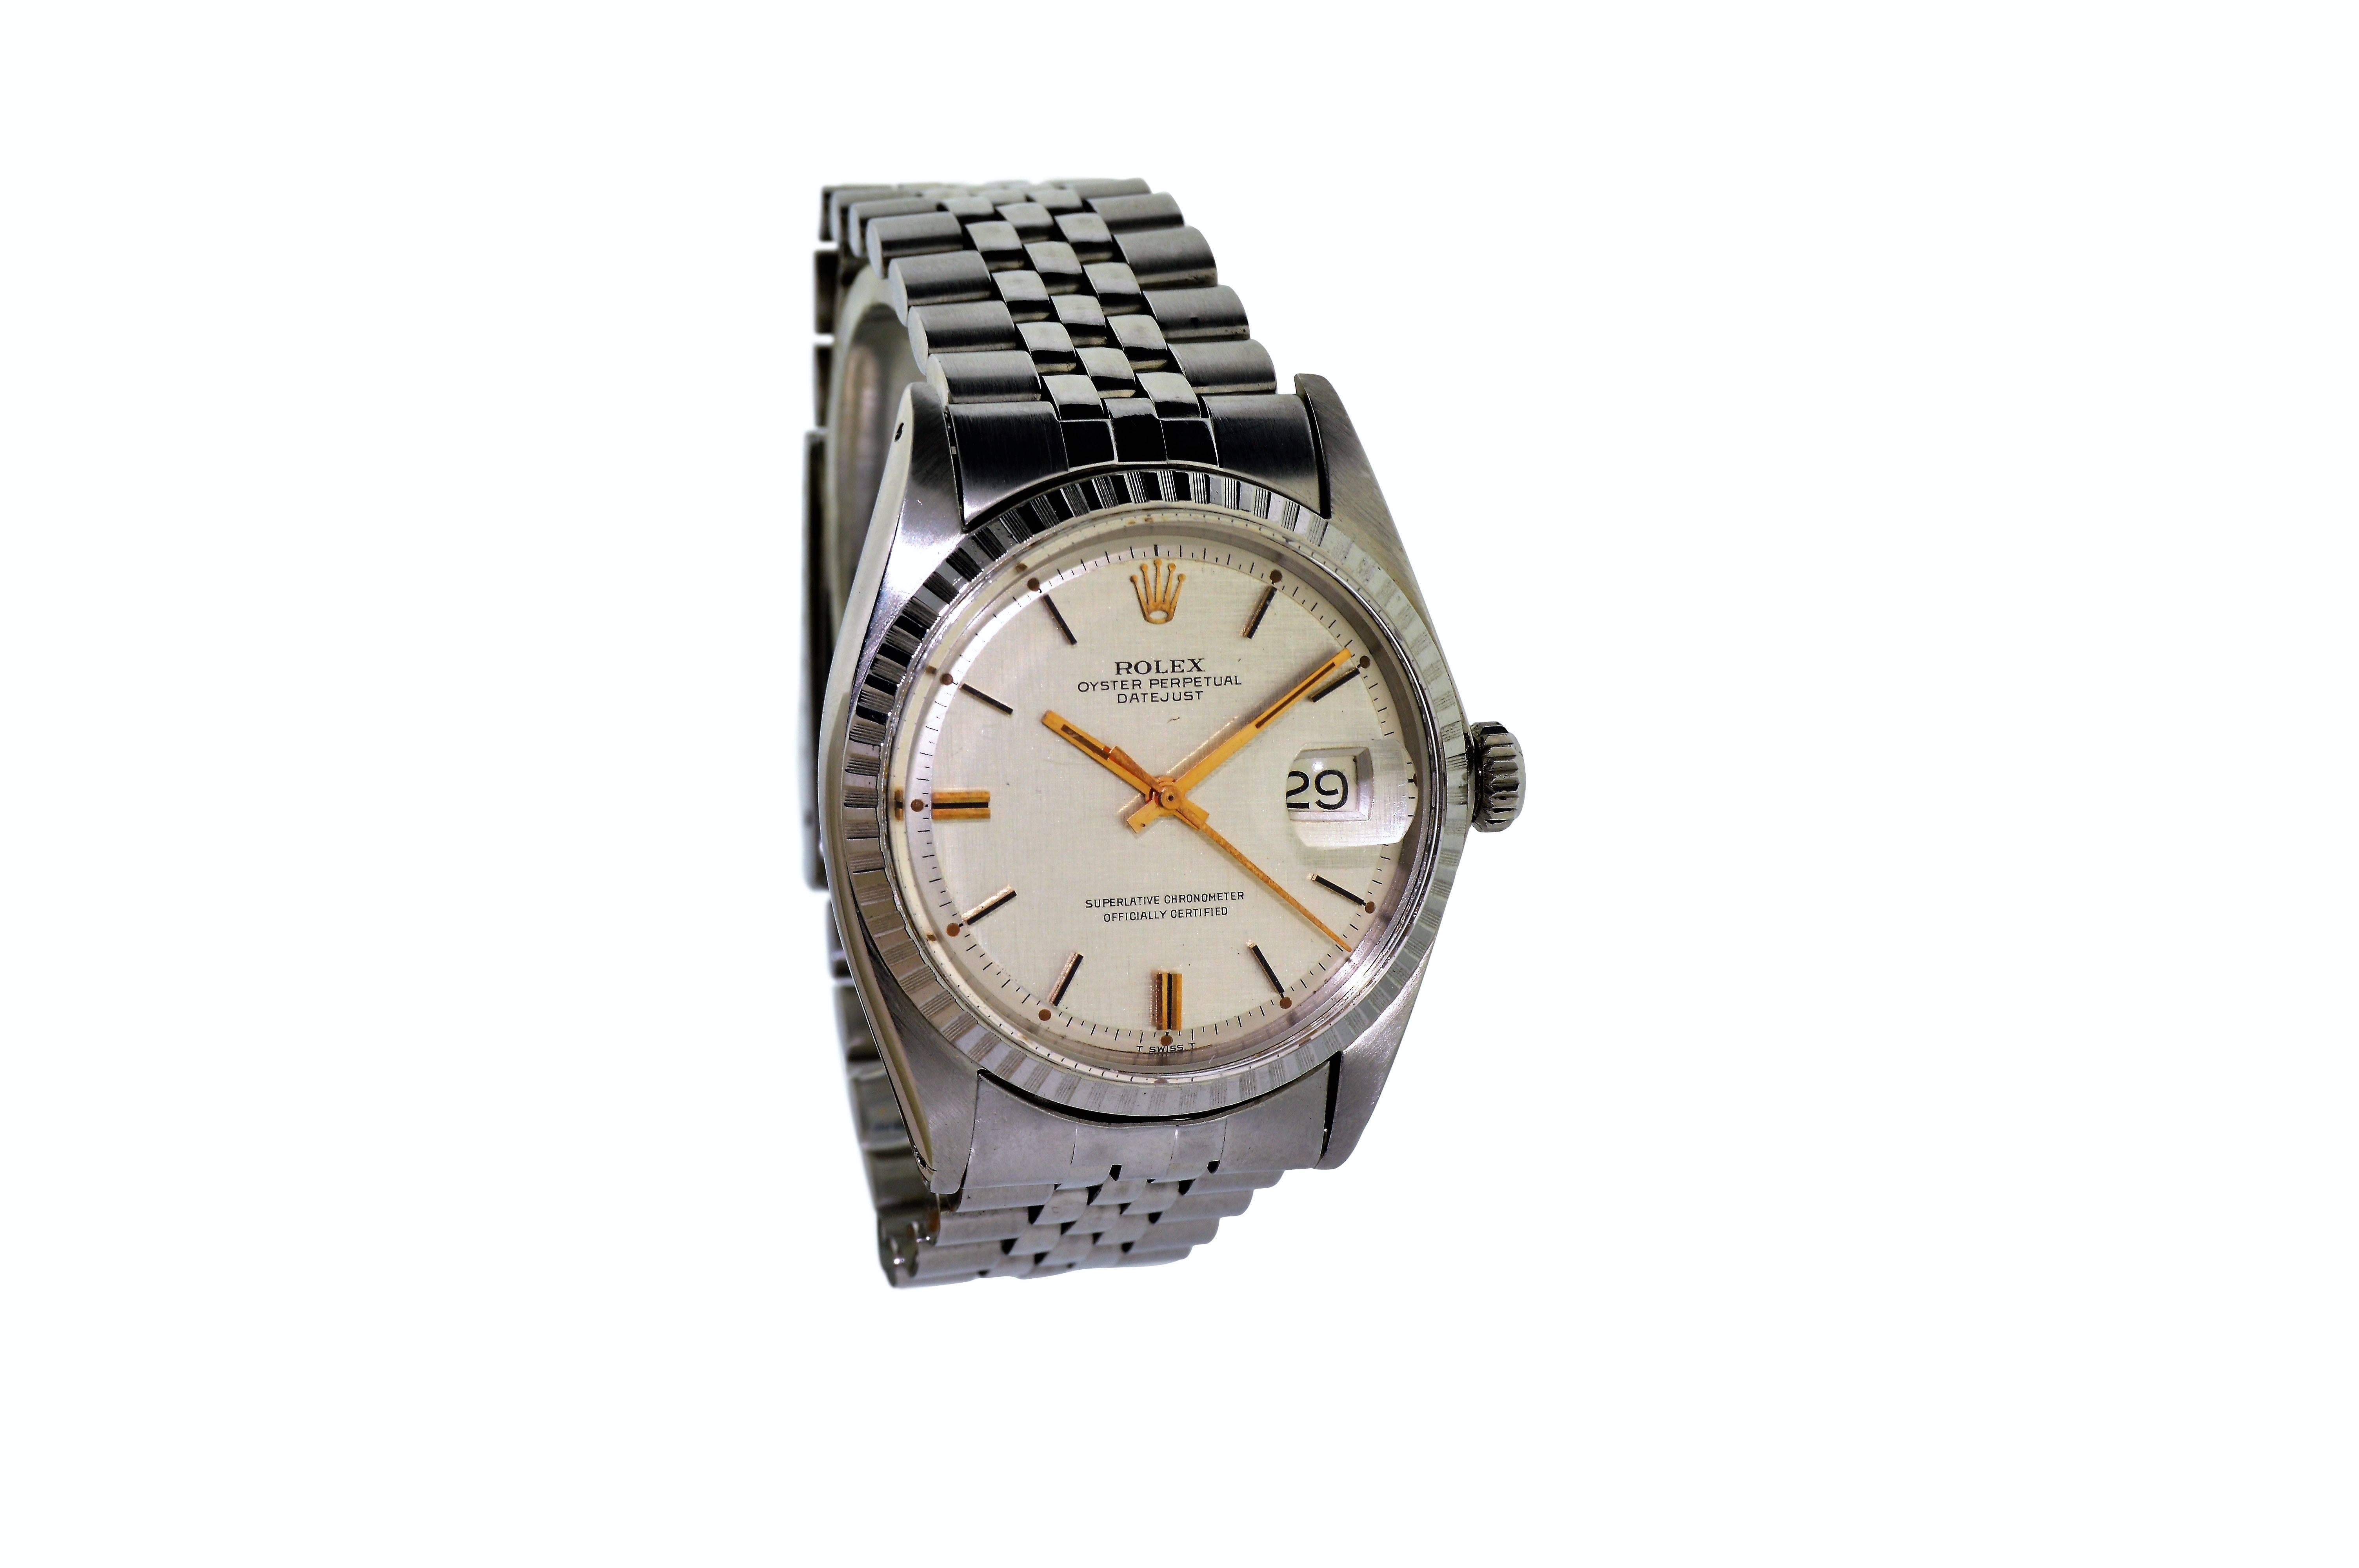 FACTORY / HOUSE: Rolex Watch Company
STYLE / REFERENCE: Datejust / Ref. 1601
METAL / MATERIAL: Stainless Steel 
DIMENSIONS:  44mm  X  36mm
CIRCA: 1969/70
MOVEMENT / CALIBER: Perpetual Winding / 26 Jewels / Cal.1570
DIAL / HANDS: Original Linen /